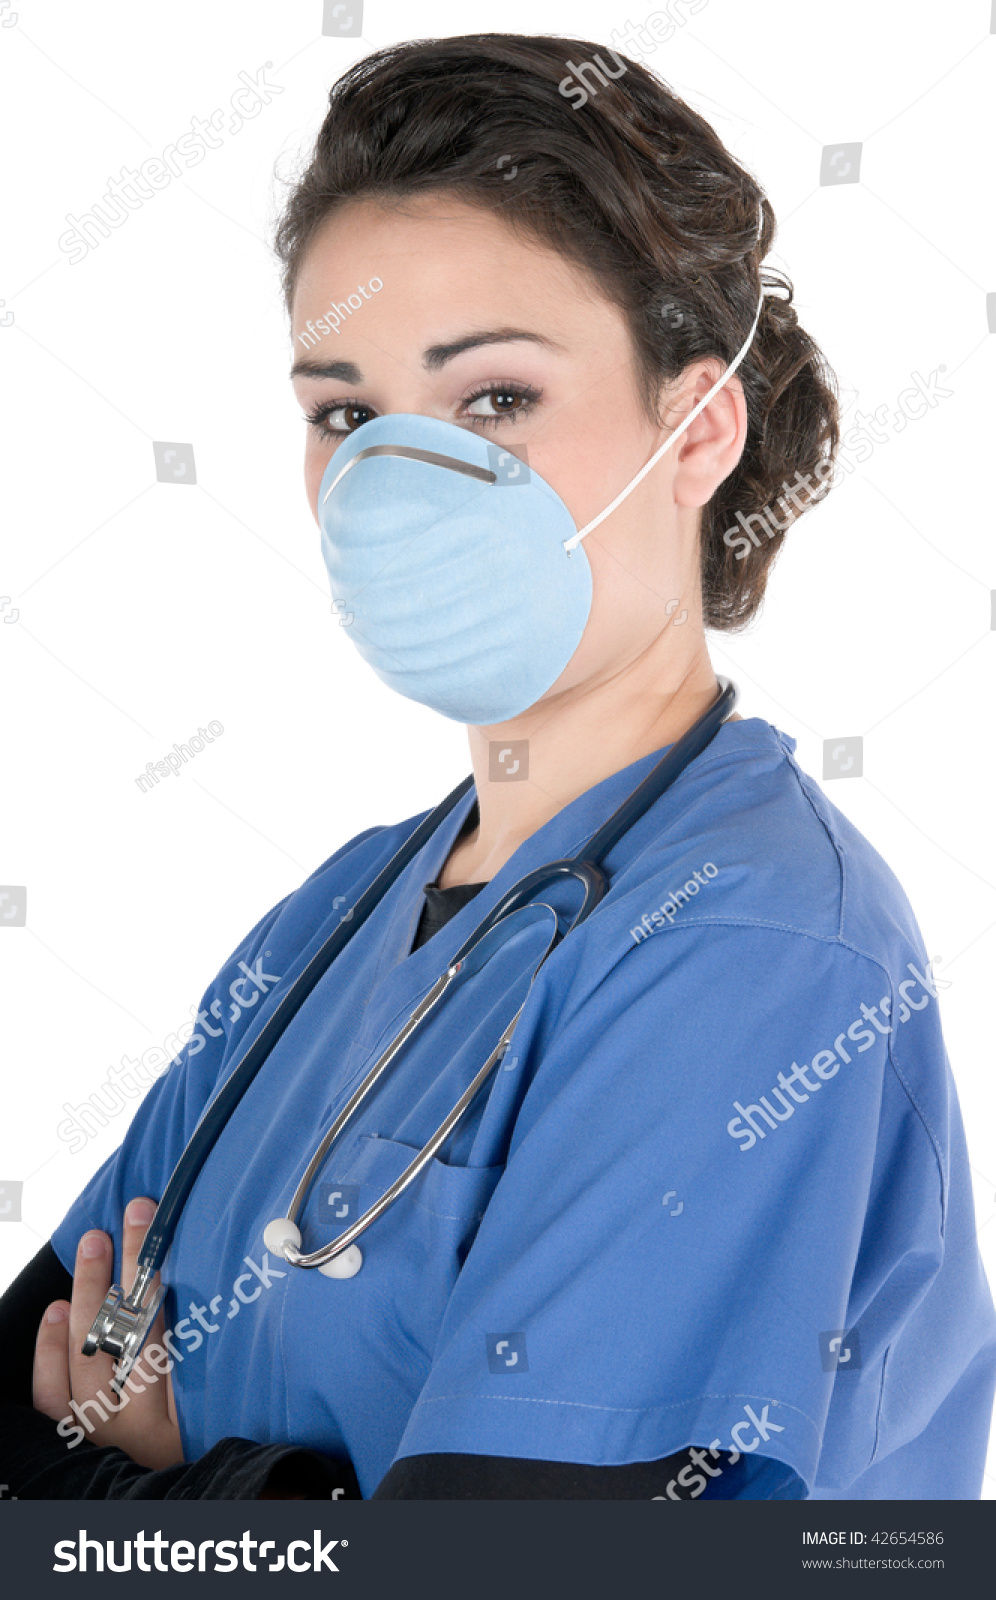 Young Female Nurse Wearing Blue Scrubs A Mask On Her Face As